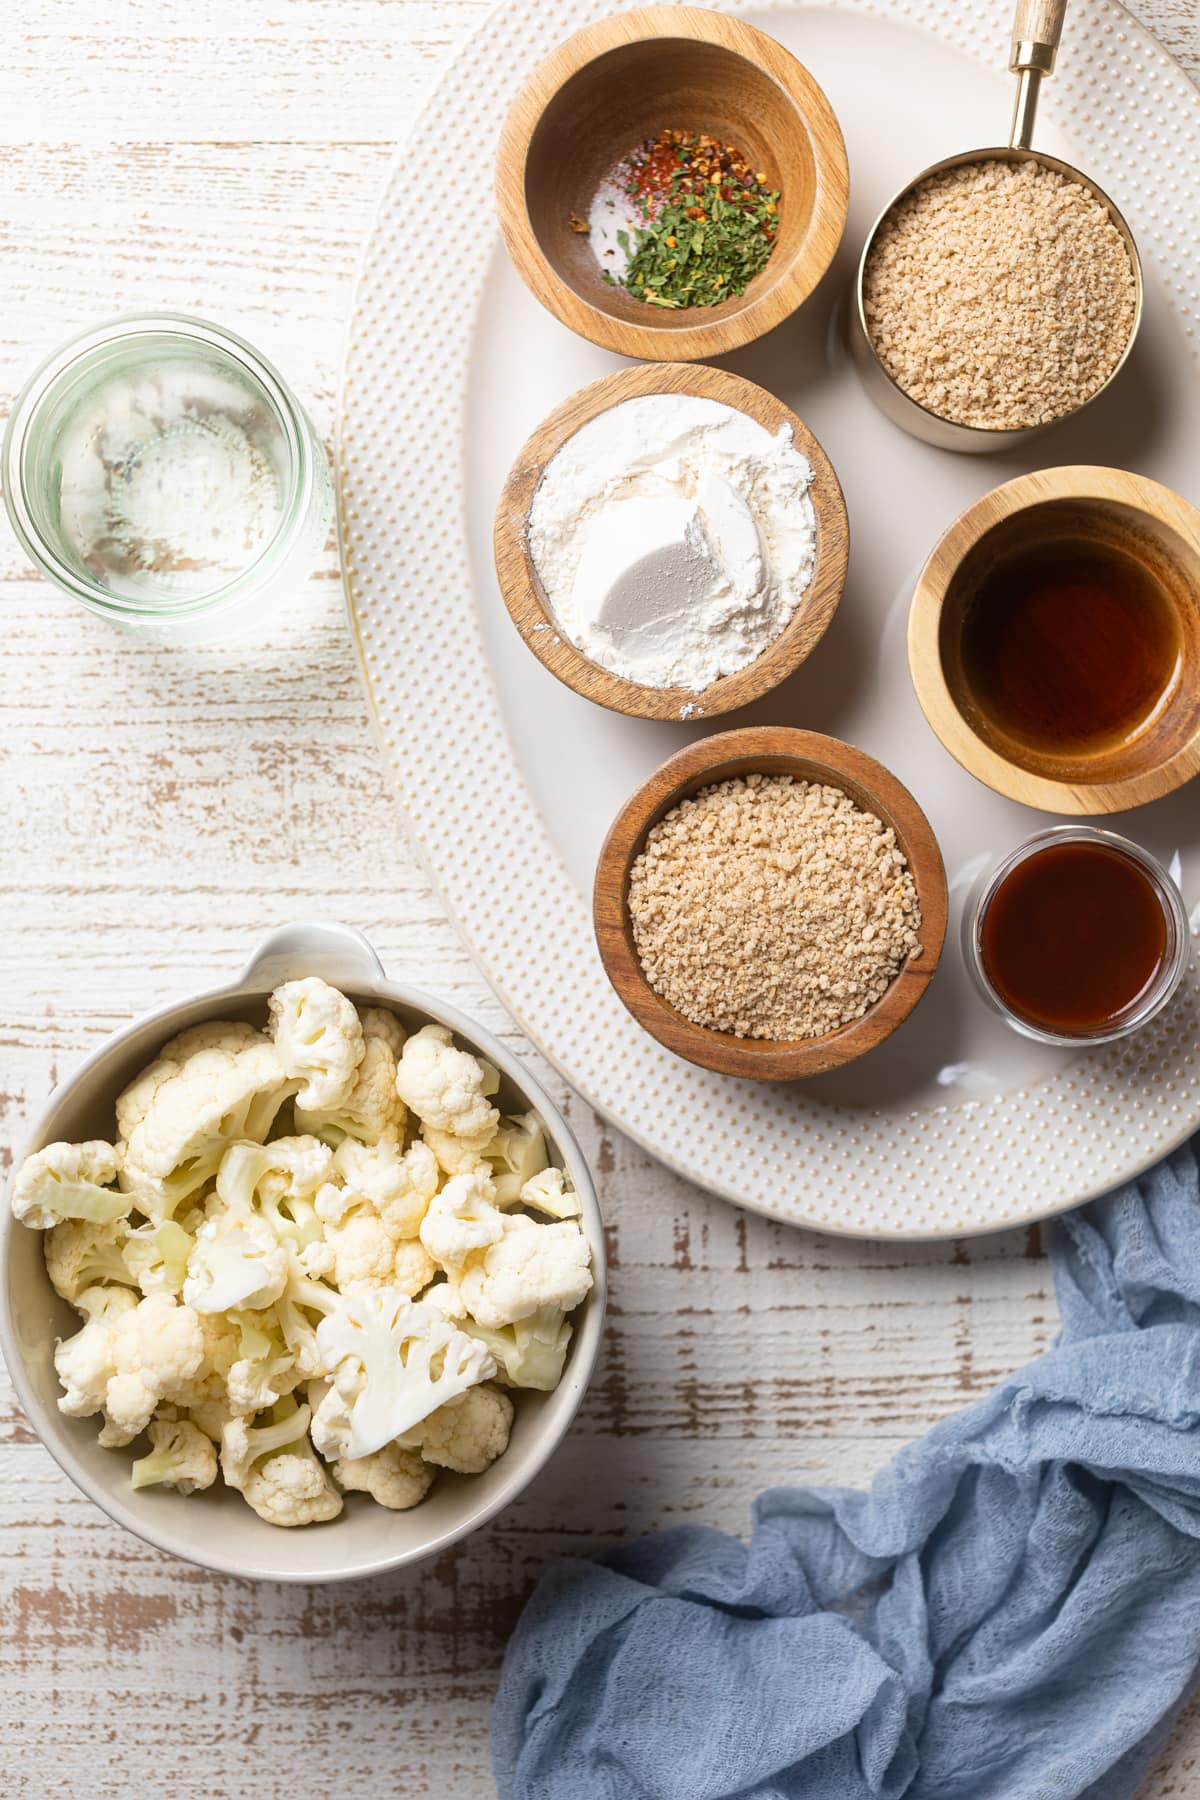 Bowl of chopped cauliflower next to a platter with ingredients like gluten-free flour and honey